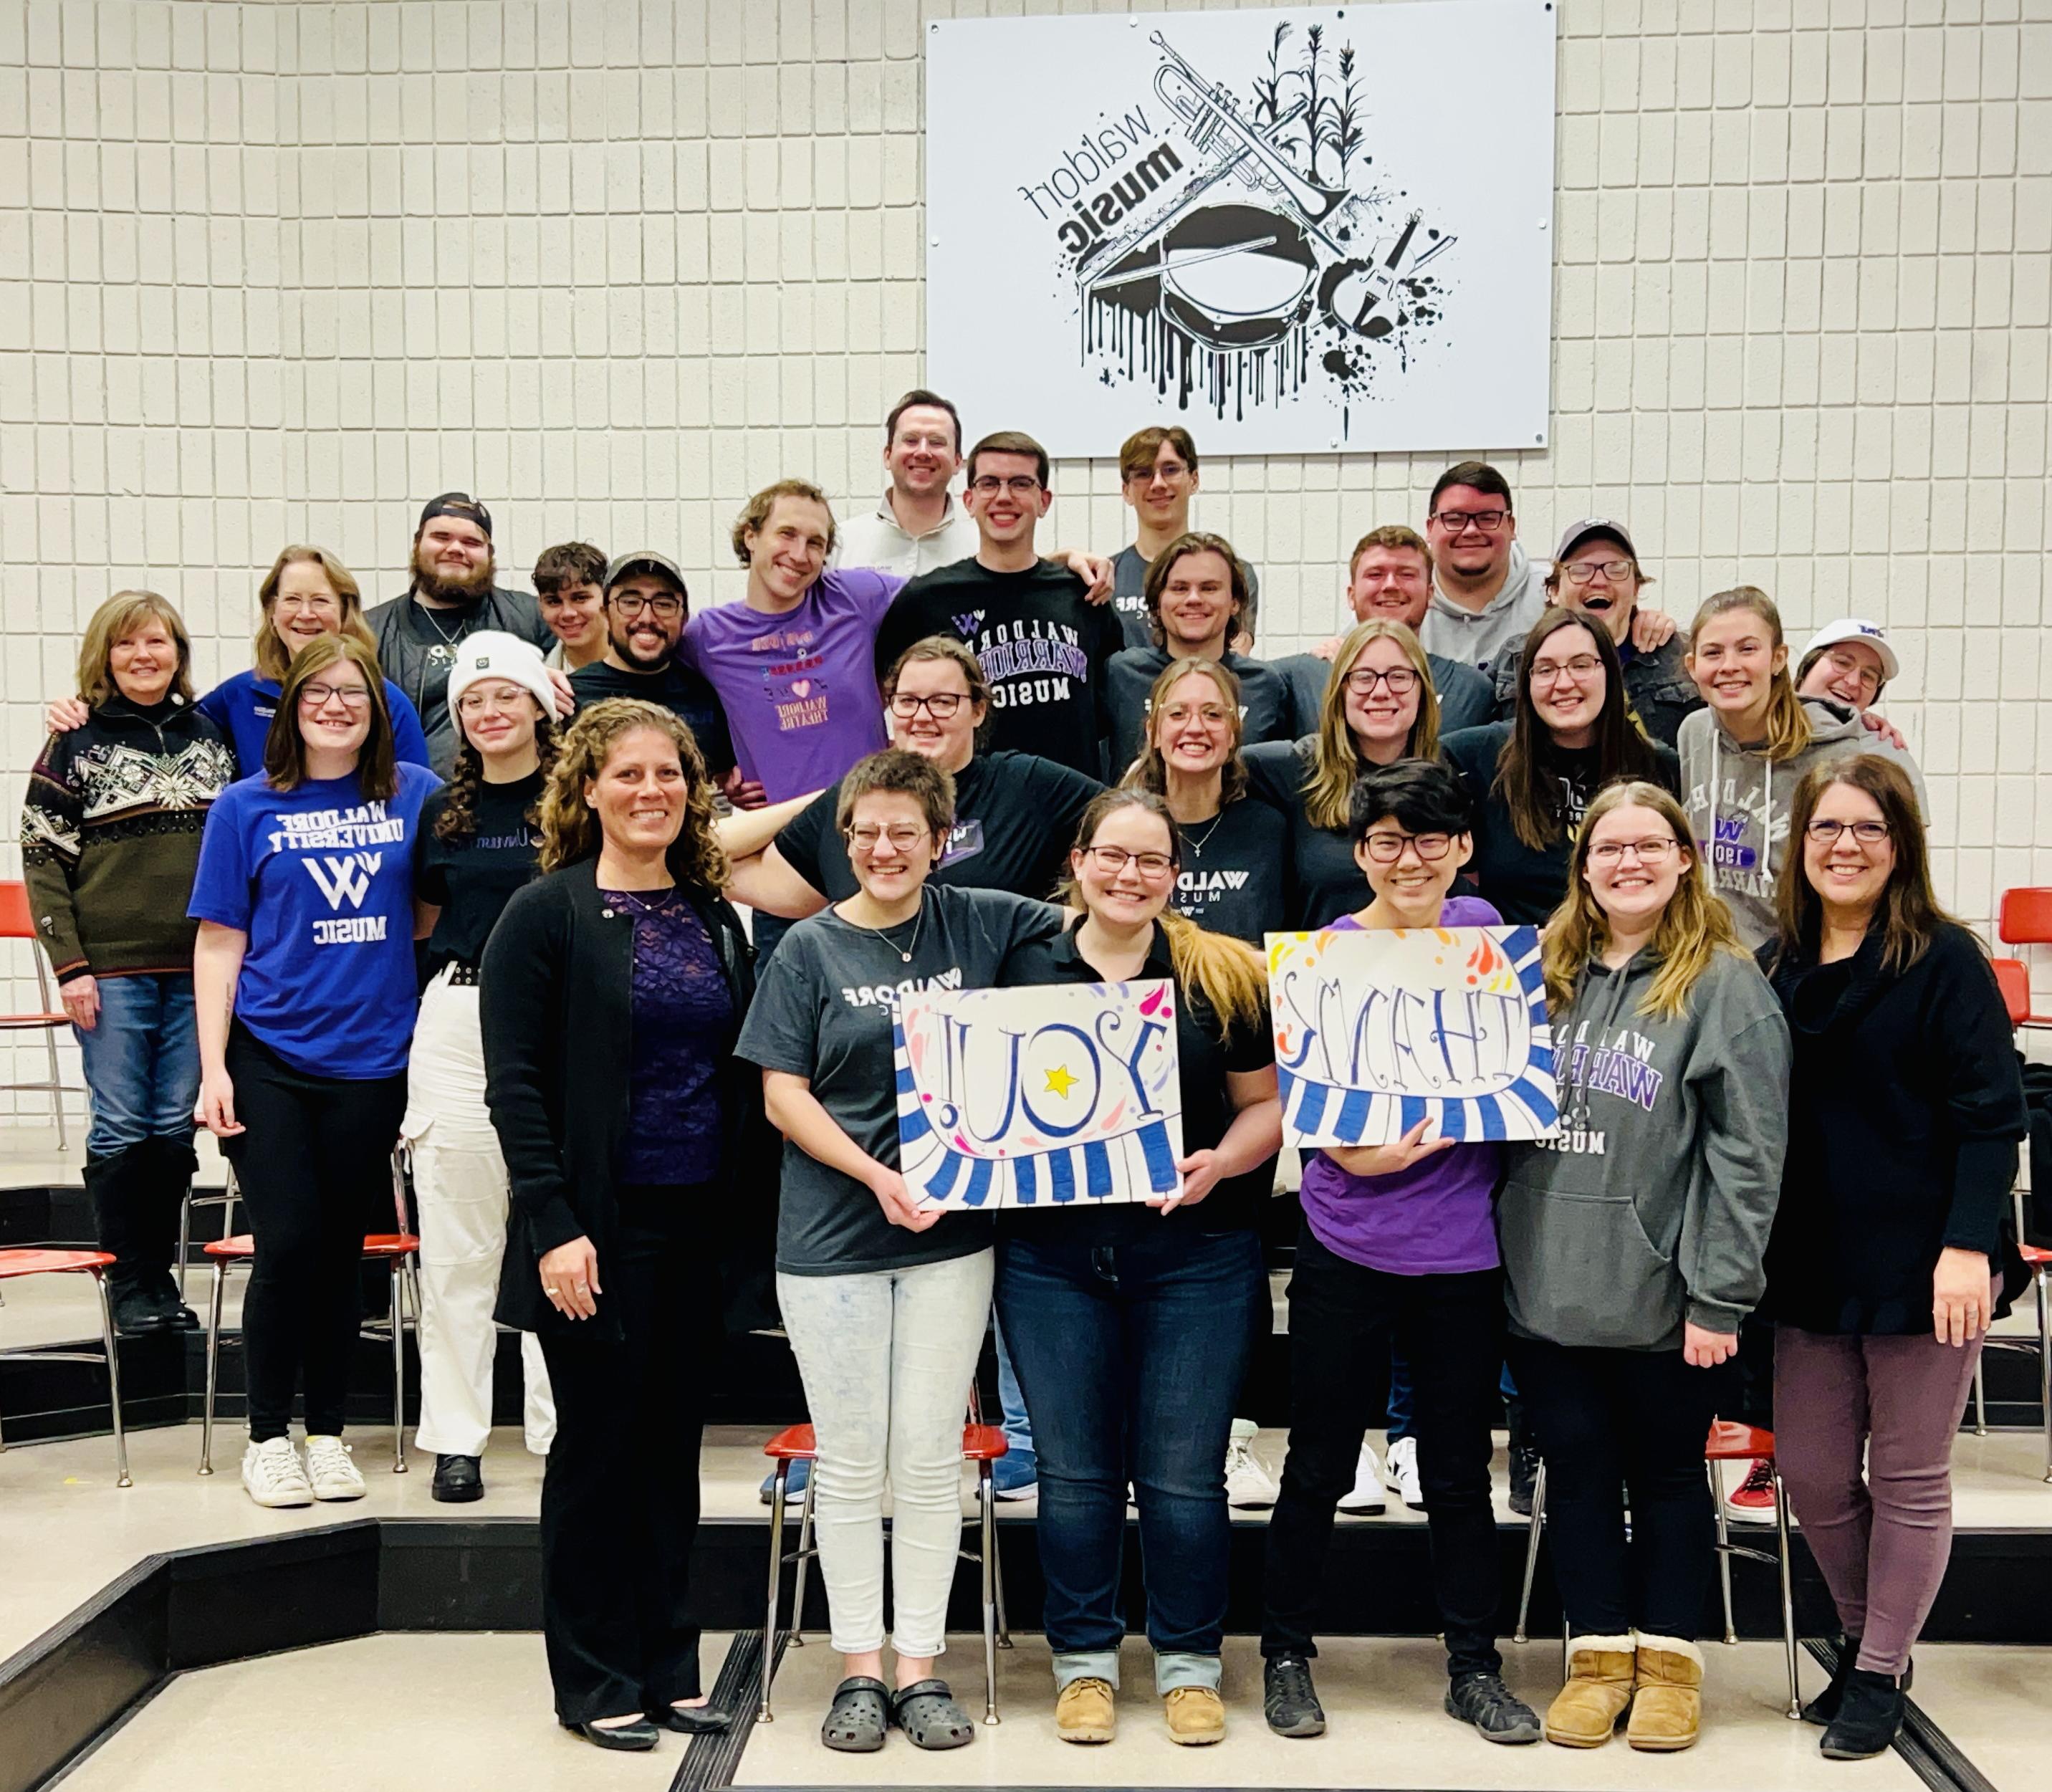 Waldorf Choir students and professors holding "Thank You" sign